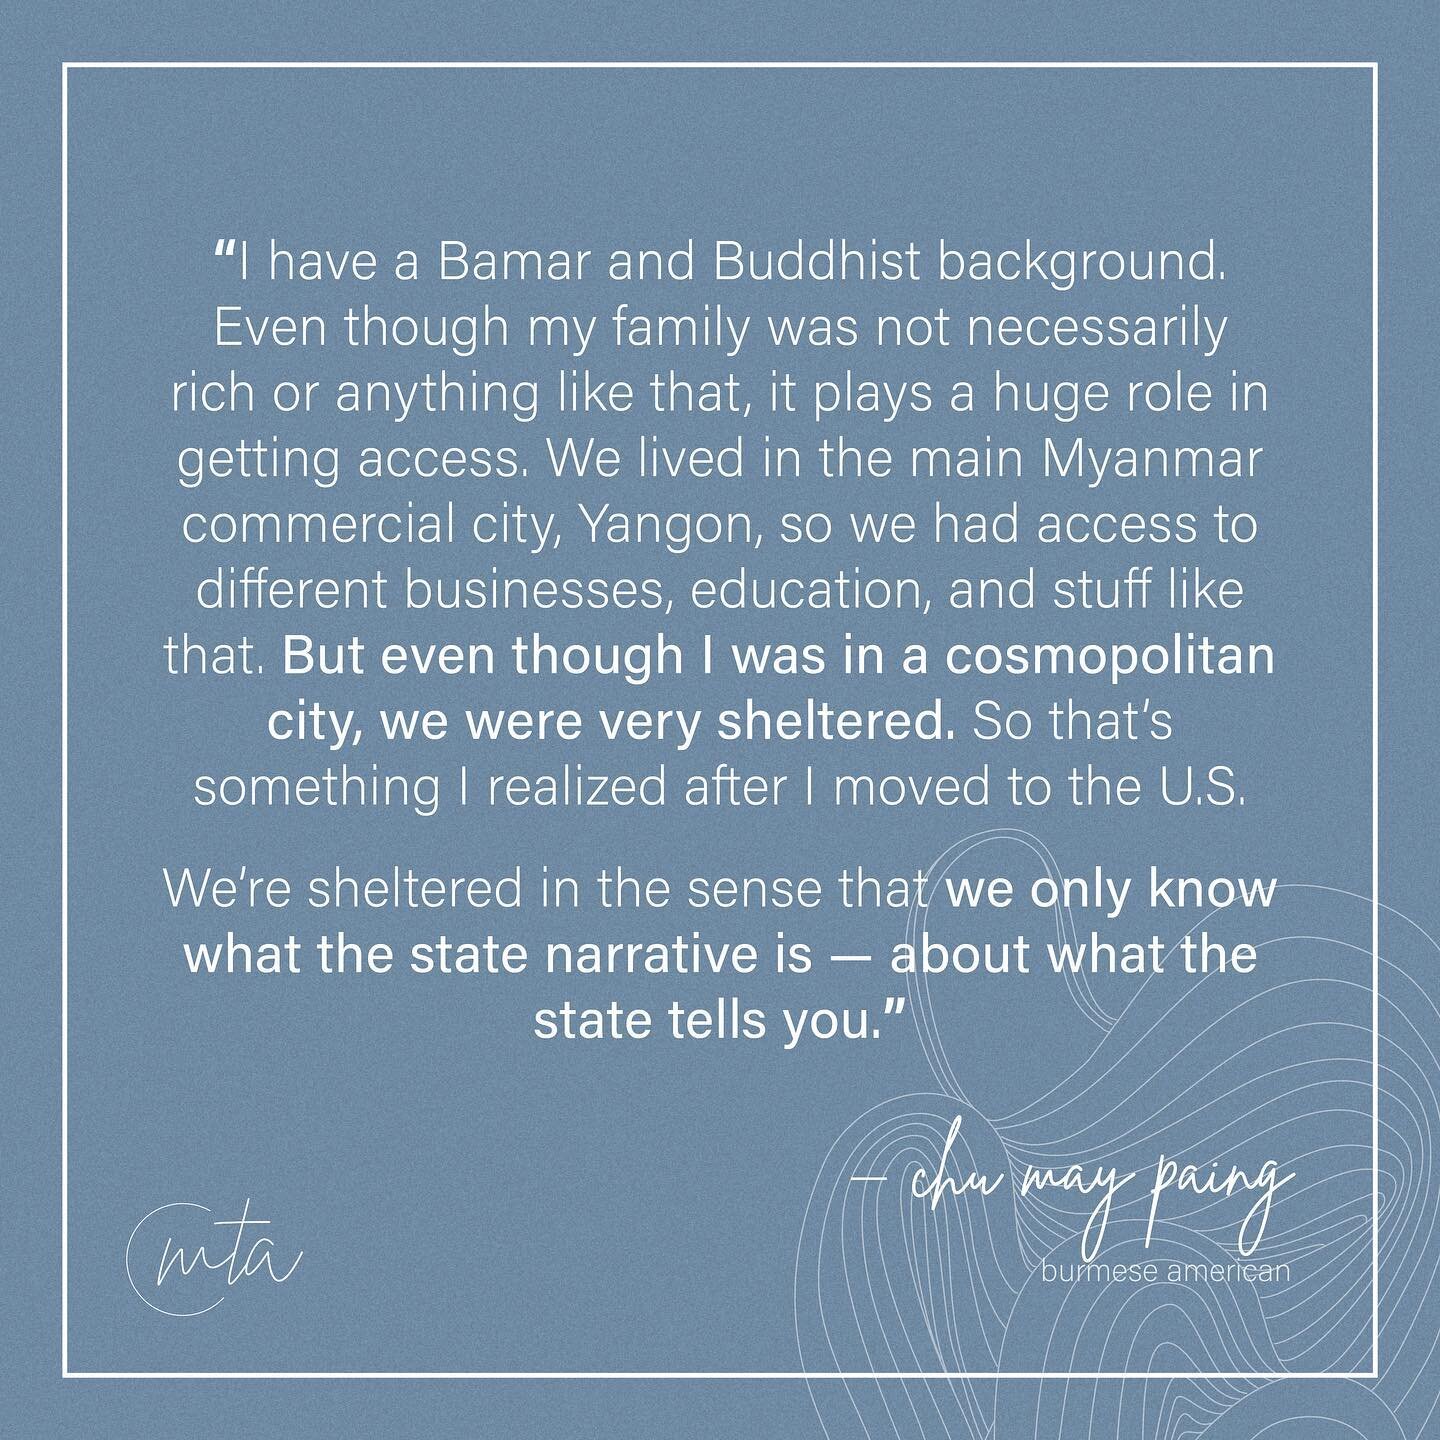 Chu shared her experience growing up Bamar and Buddhist in Myanmar. Her story is an example of how much our current environments affect our worldview and understanding of other cultures. 

Her final message encourges the #AAPI community to make more 